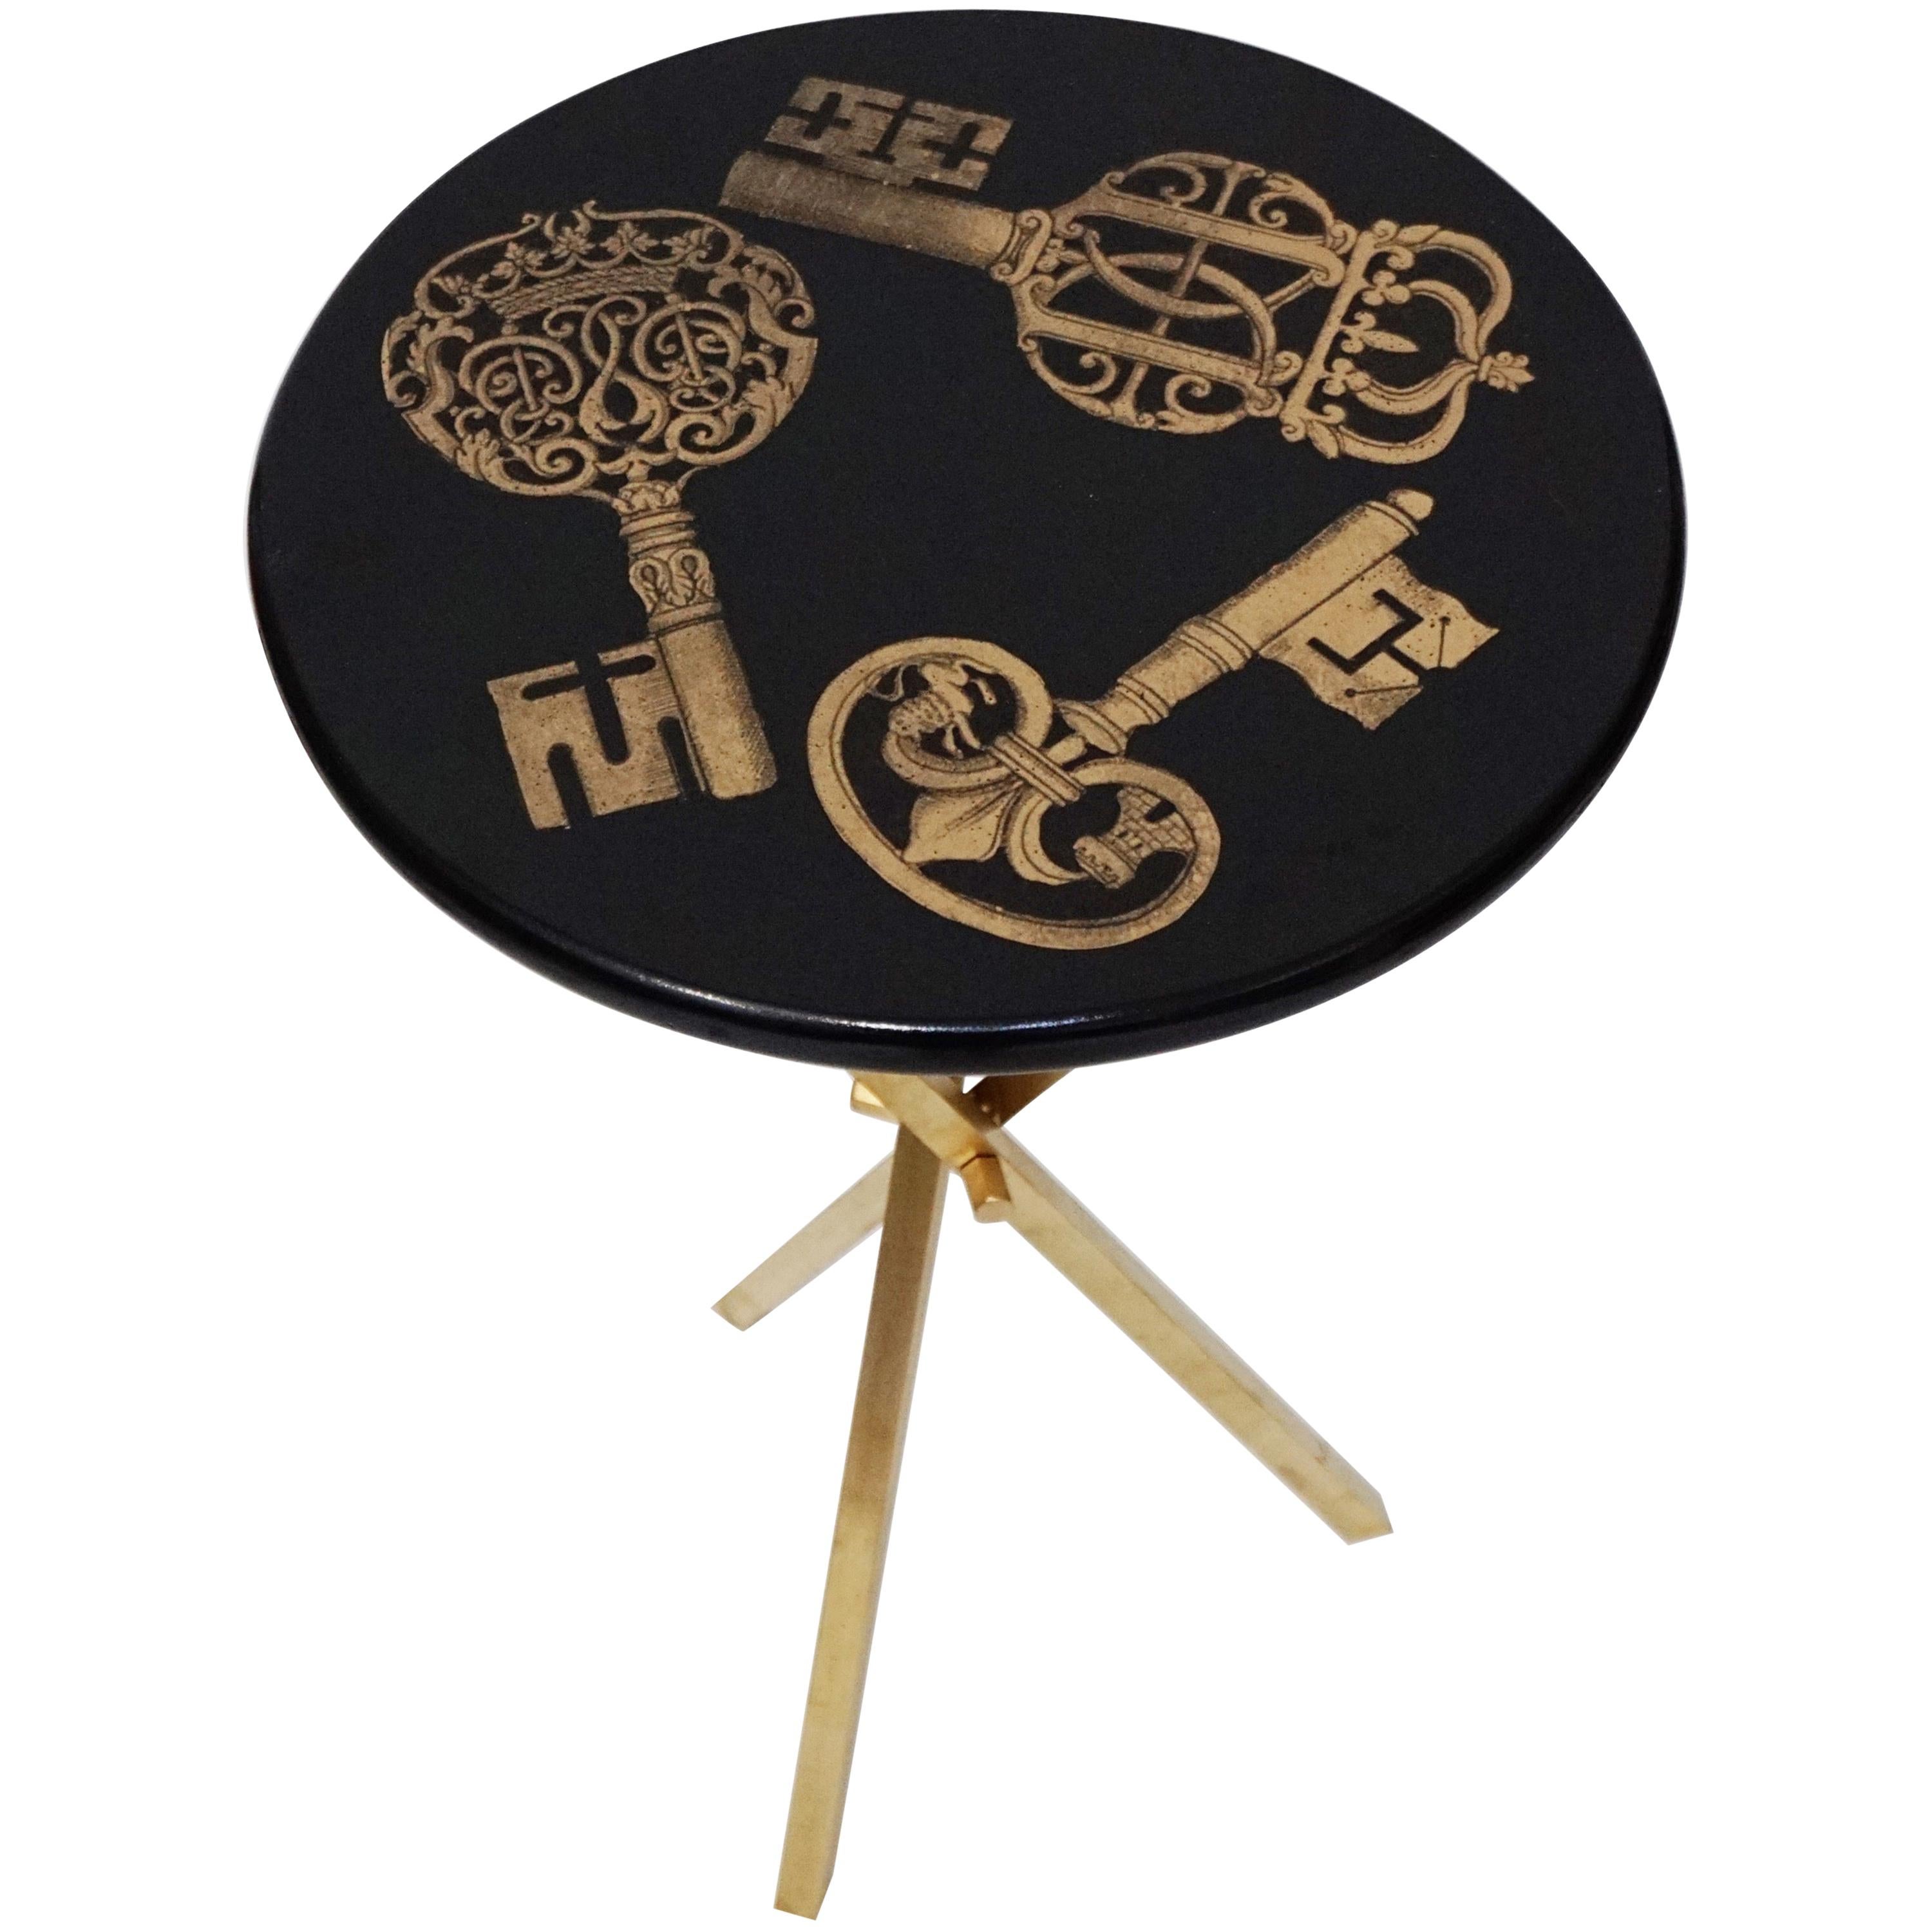 'Chiavi' Brass Tripod Side Table by Piero Fornasetti, circa 1960s Italy, Signed